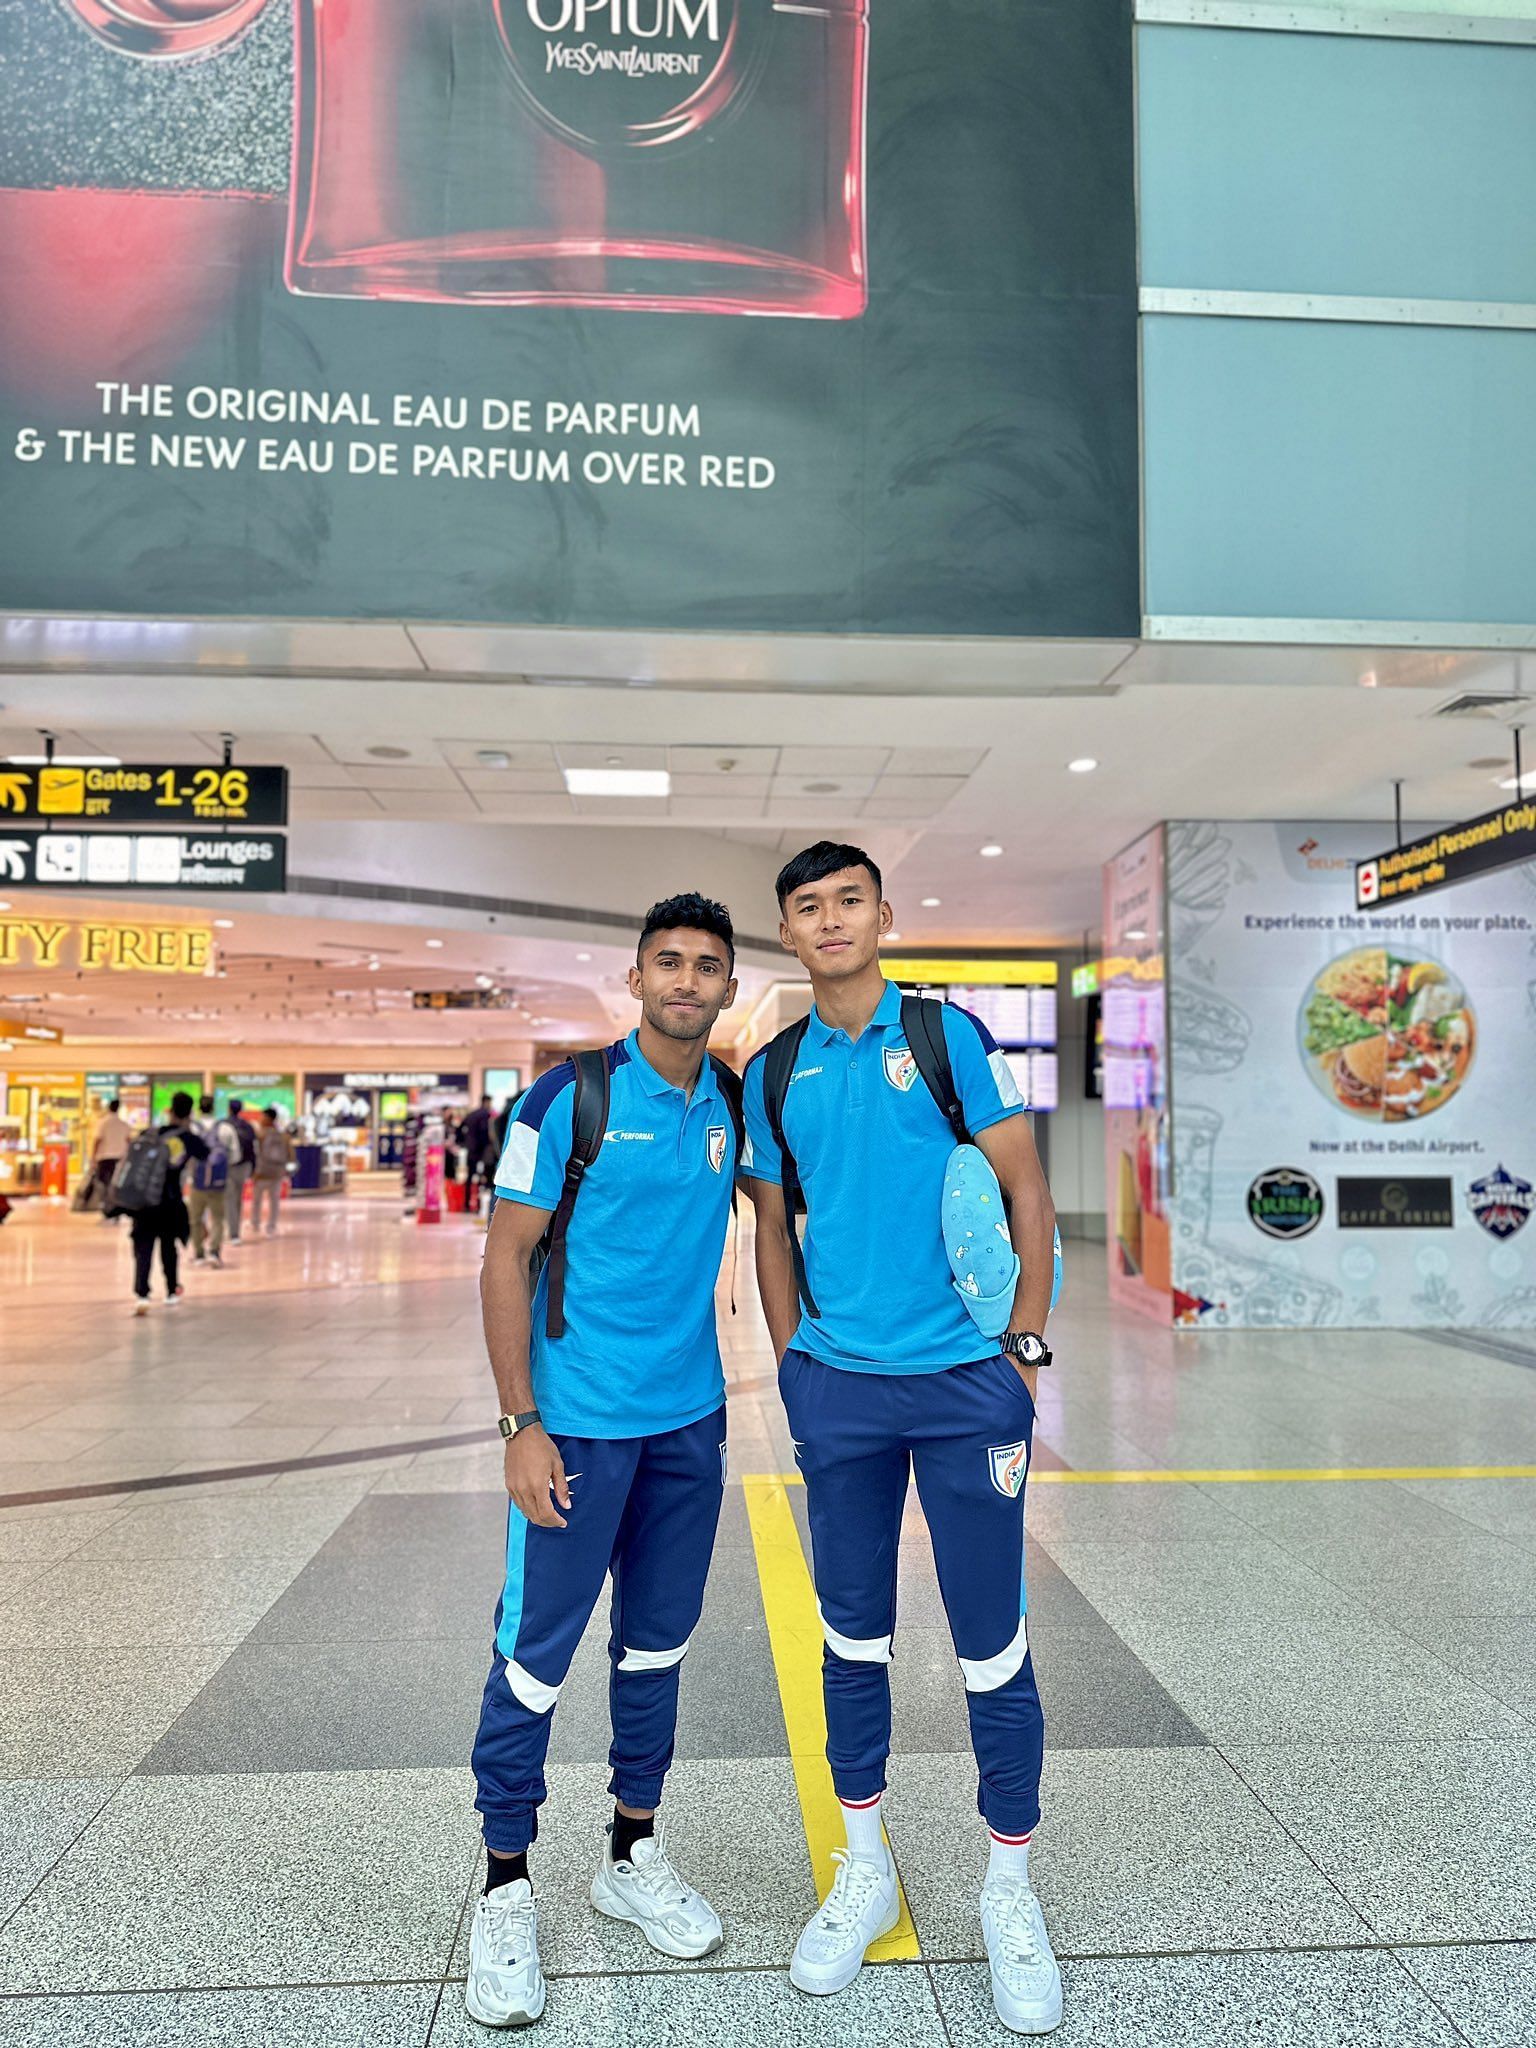 Zothanpuia (right) was picked for India U-23 along with Abdul Rabeeh (left) in the March international break.